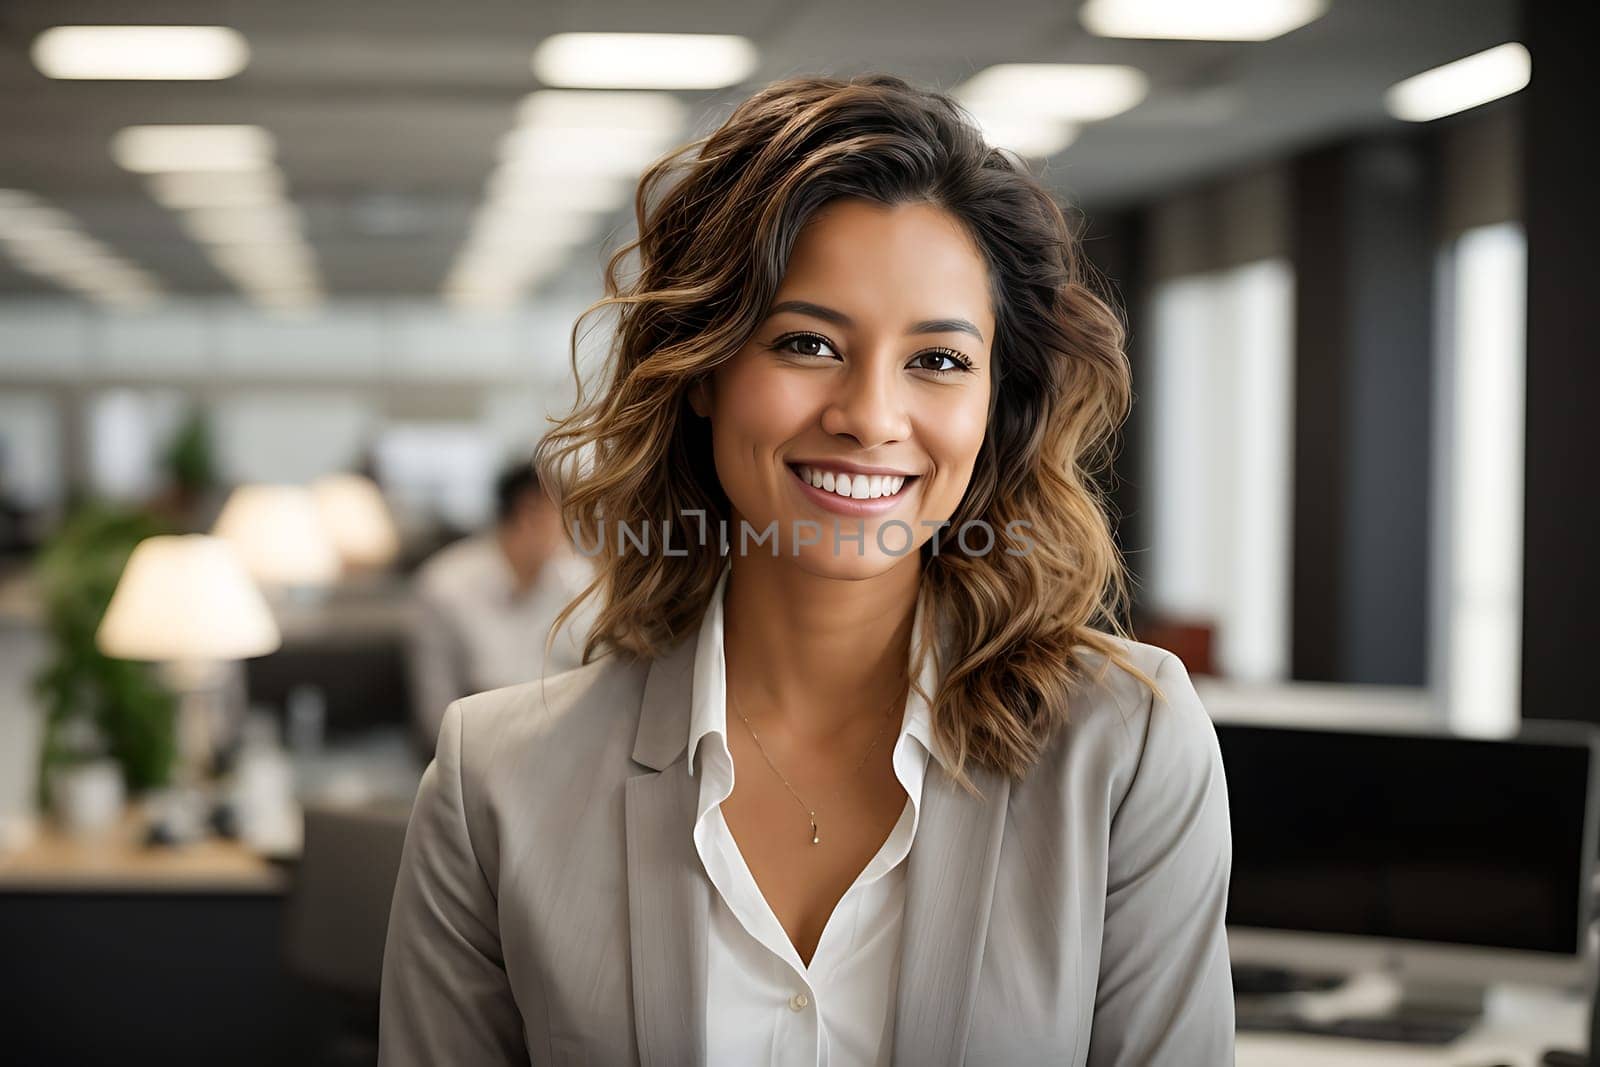 A cheerful woman wearing professional attire smiles in a well-lit office space.